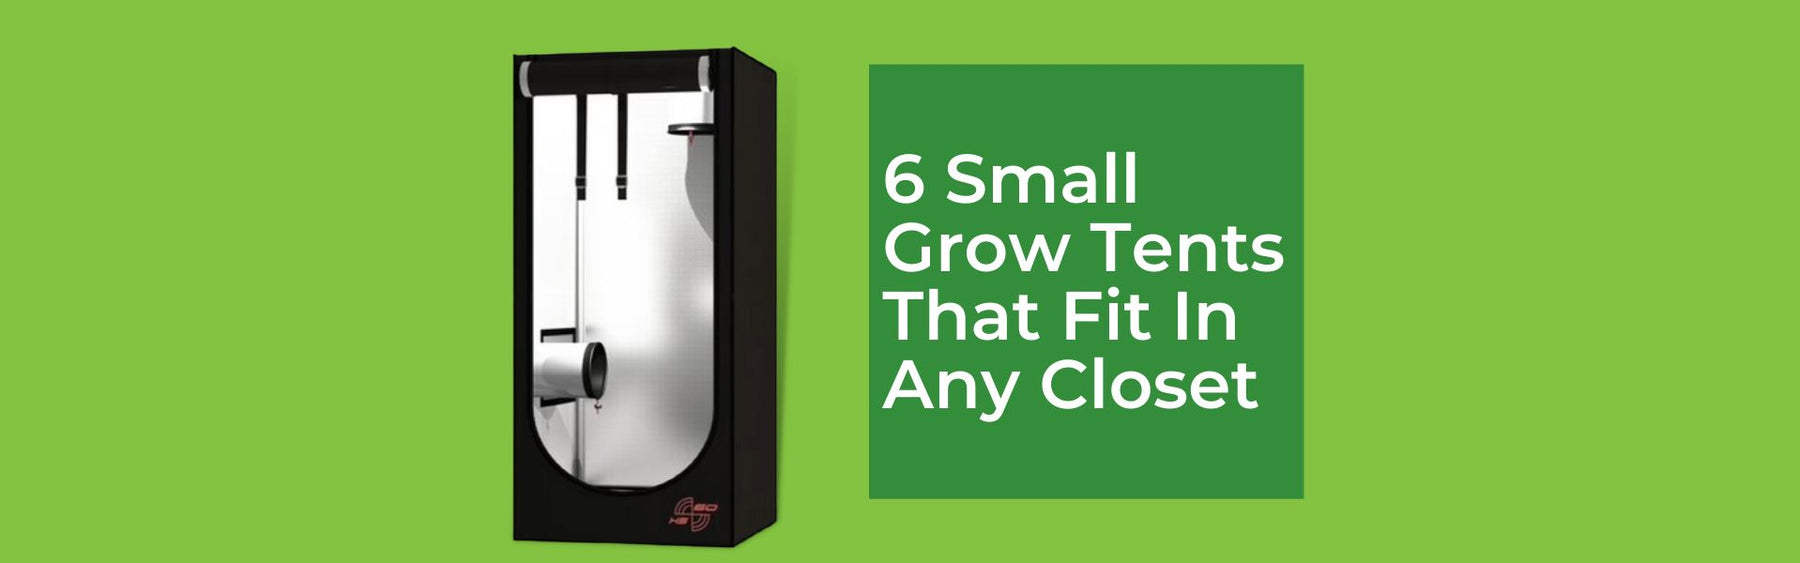 Small grow tents that fit any closet